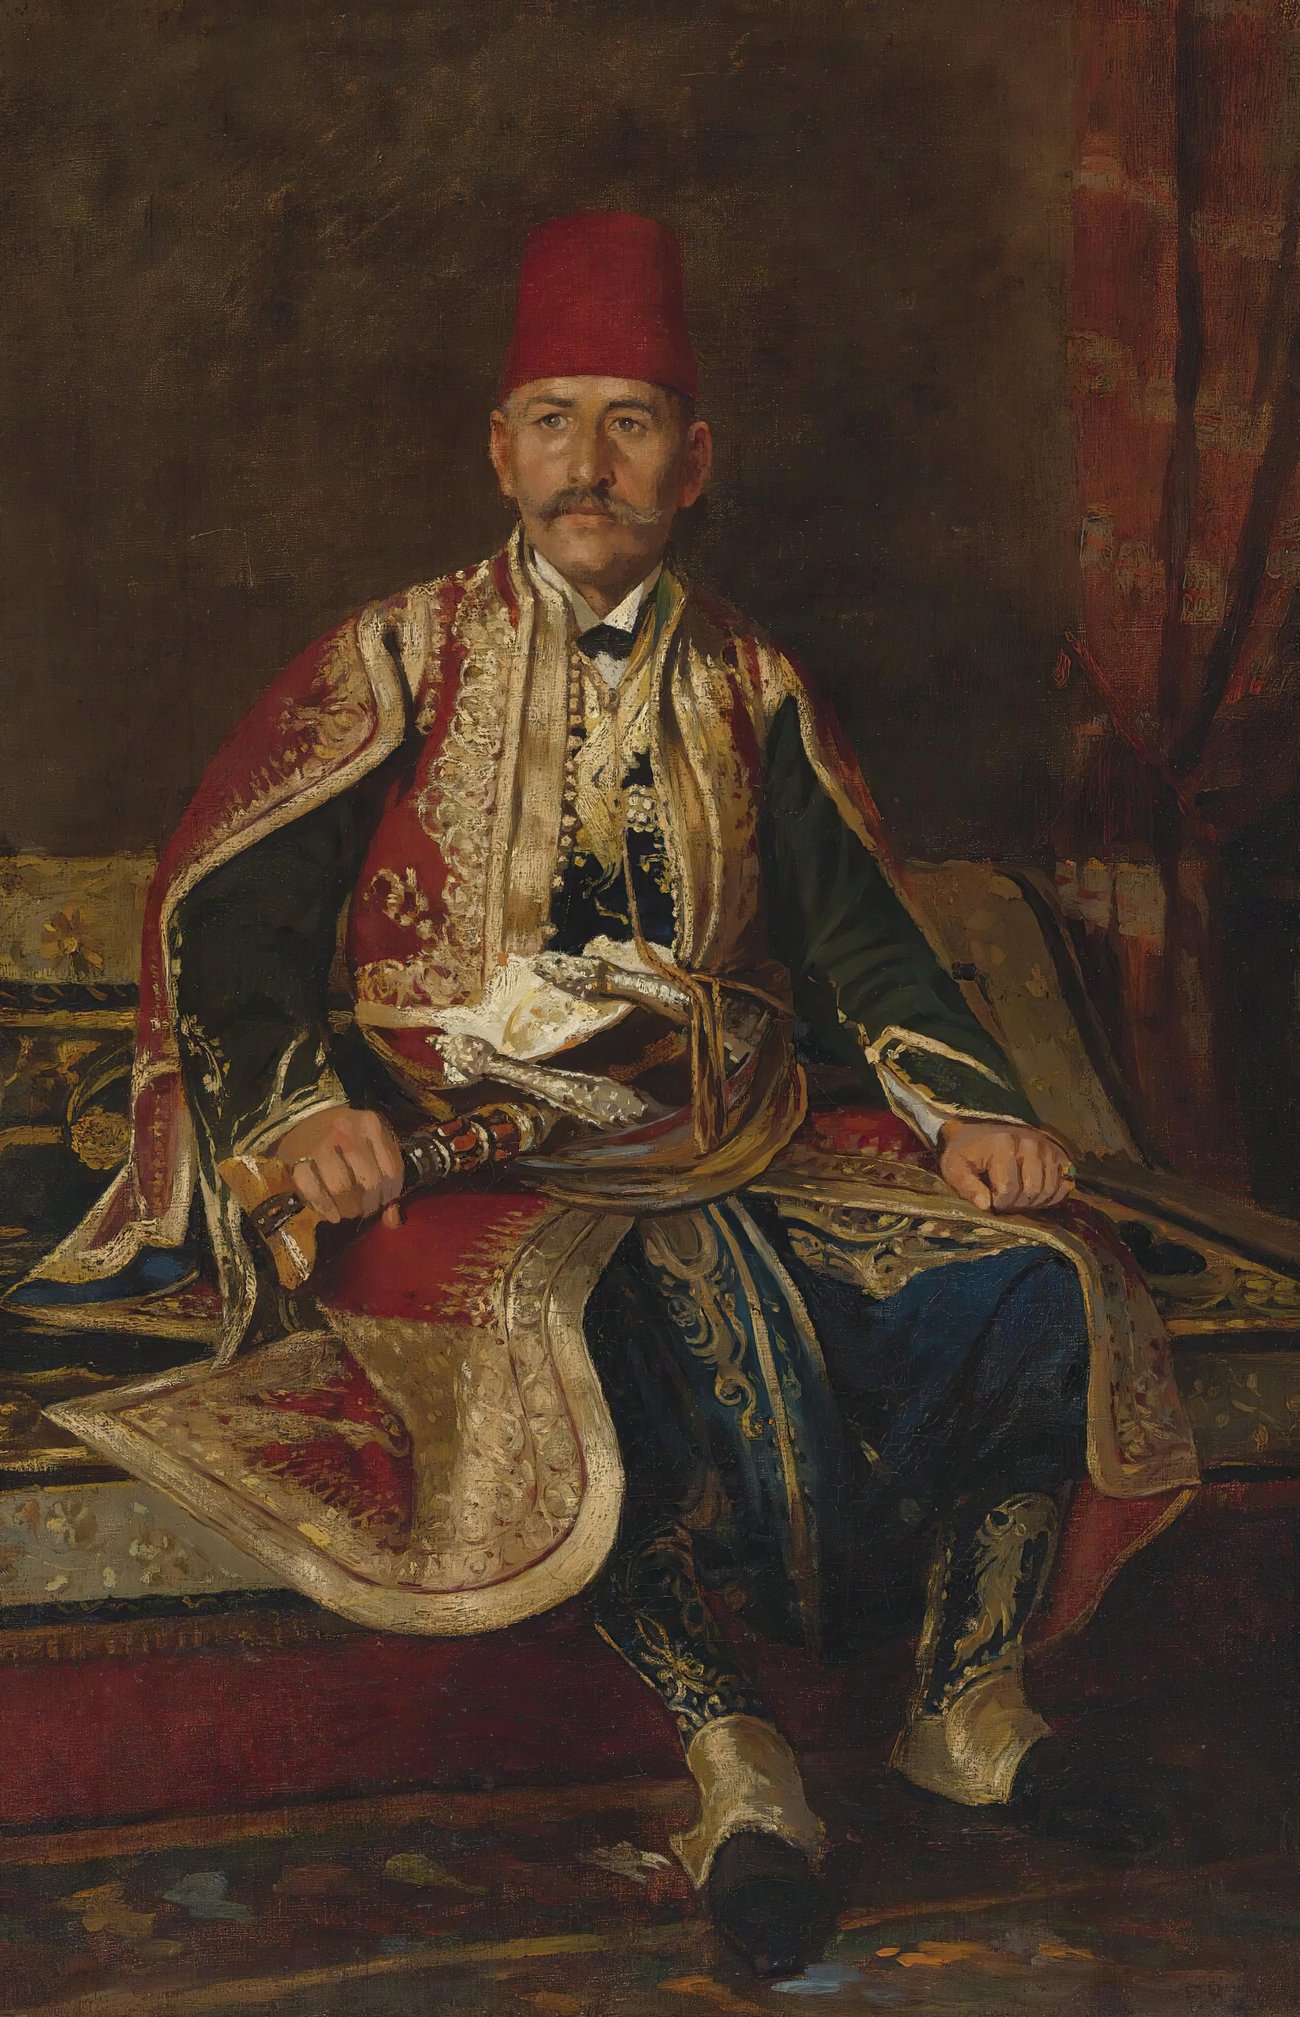 Turkish noble seated in a carpeted interior